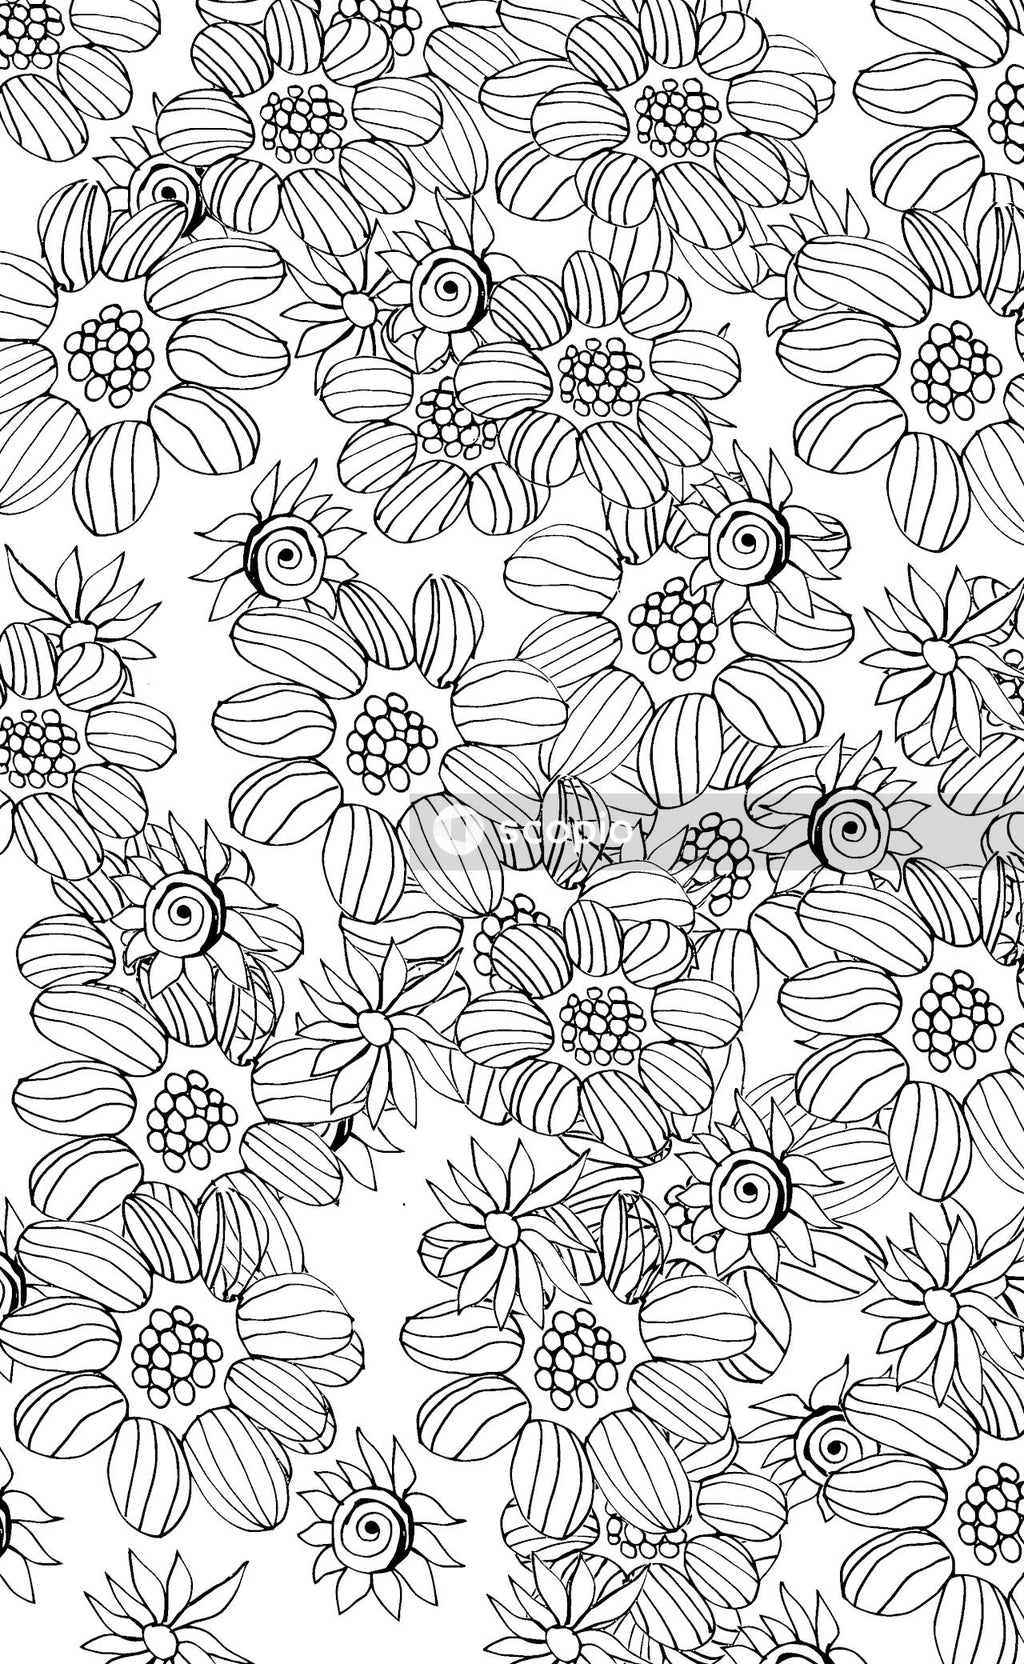 Black and white floral textile